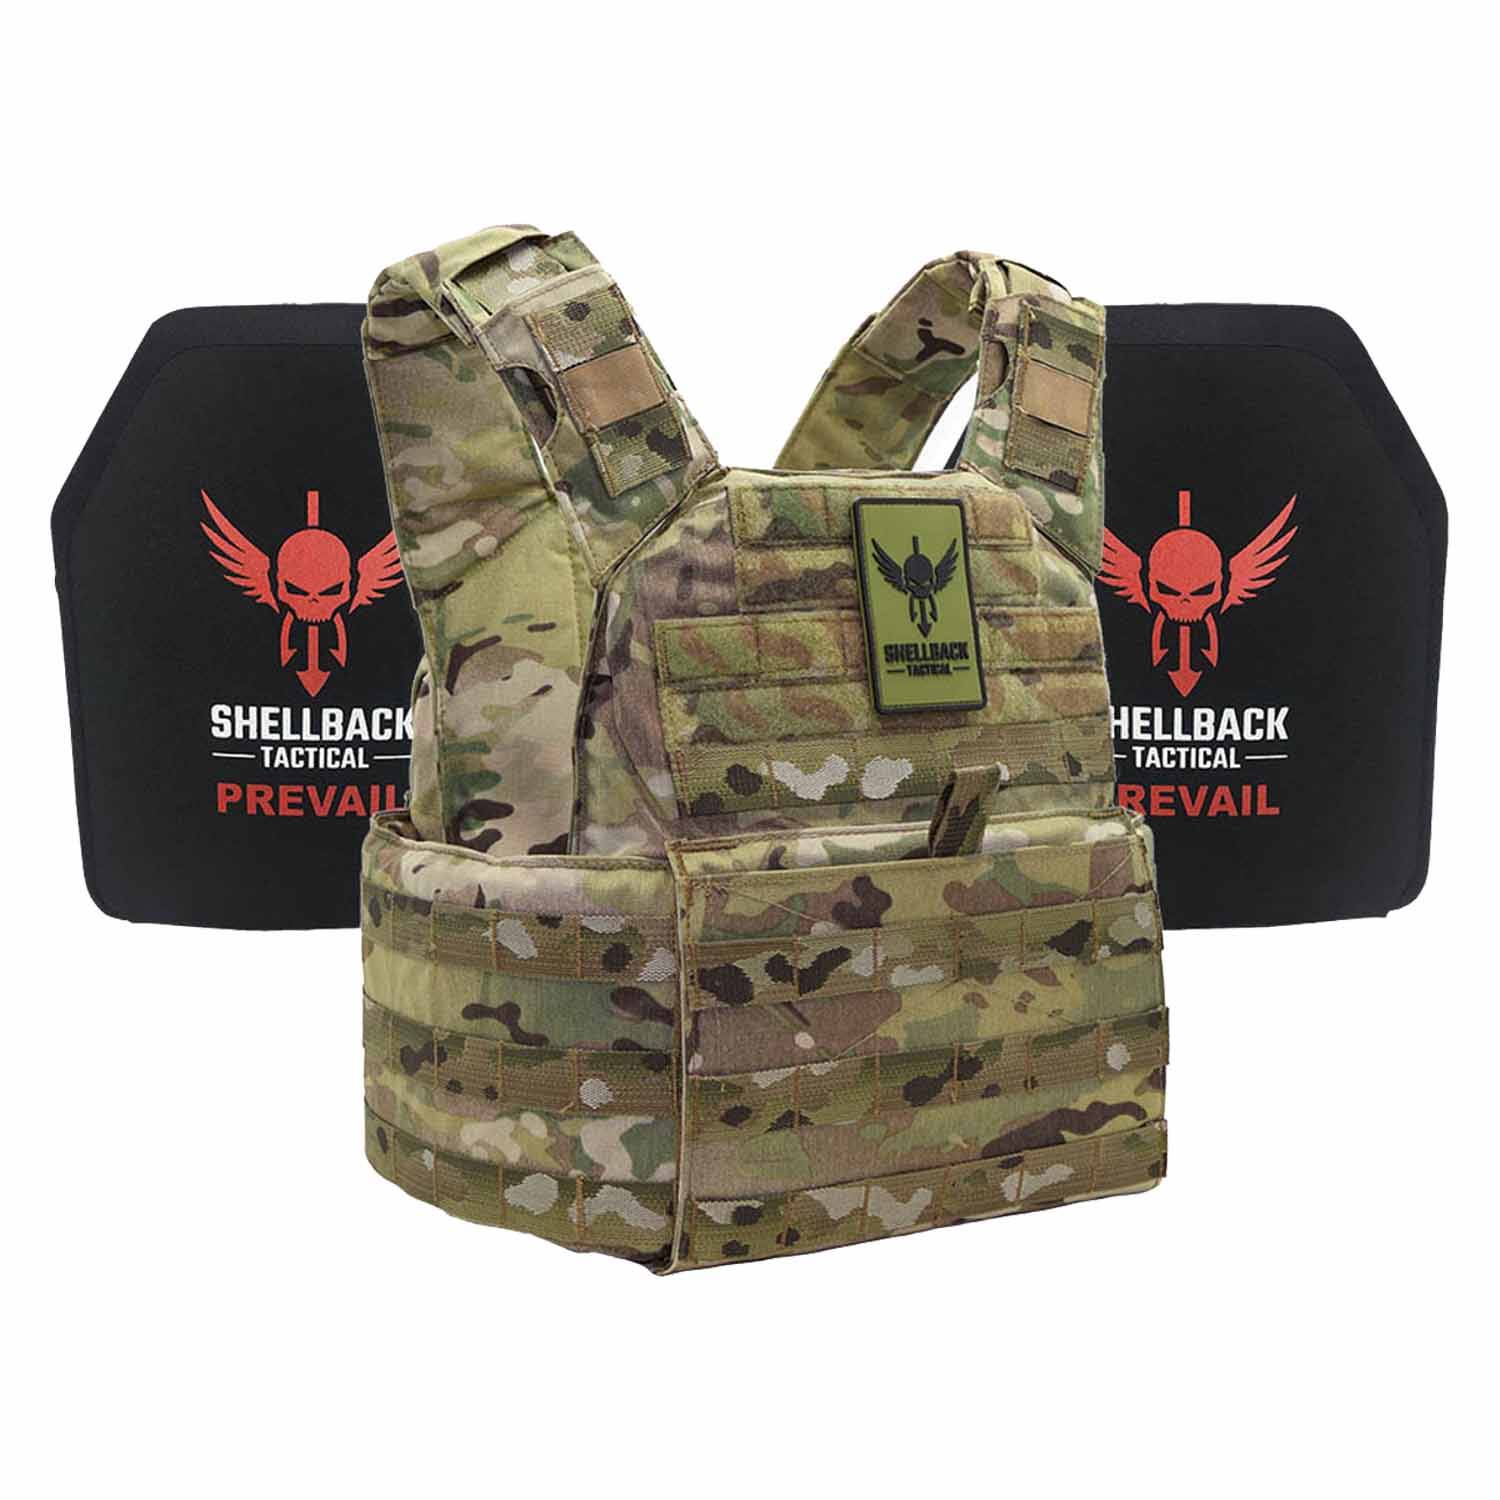 SHELLBACK TACTICAL BANSHEE RIFLE LIGHTWEIGHT ARMOR SYSTEM WI